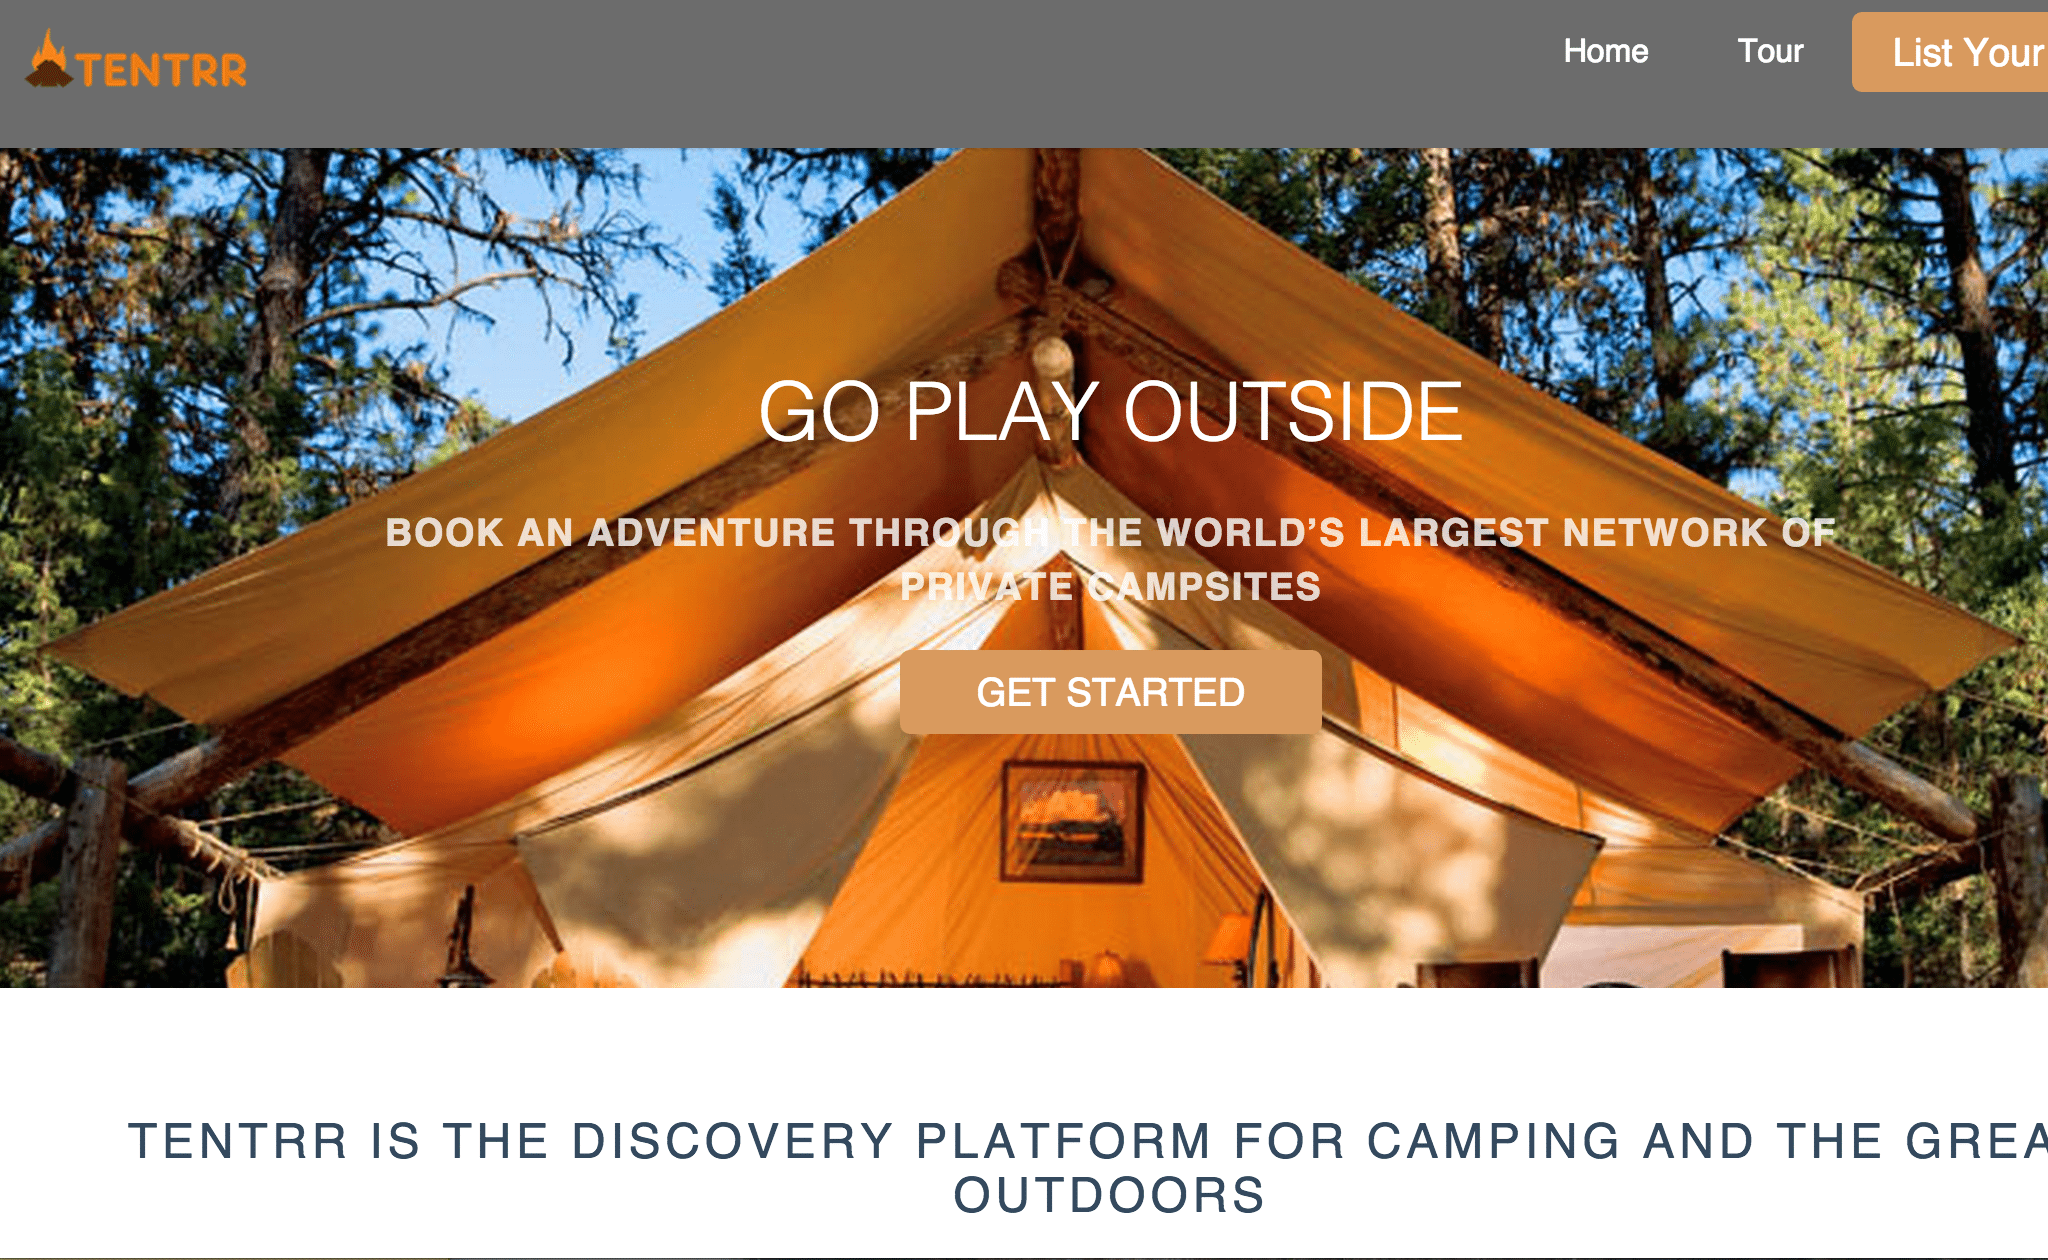 Tentrr is a platform to book camping trips.